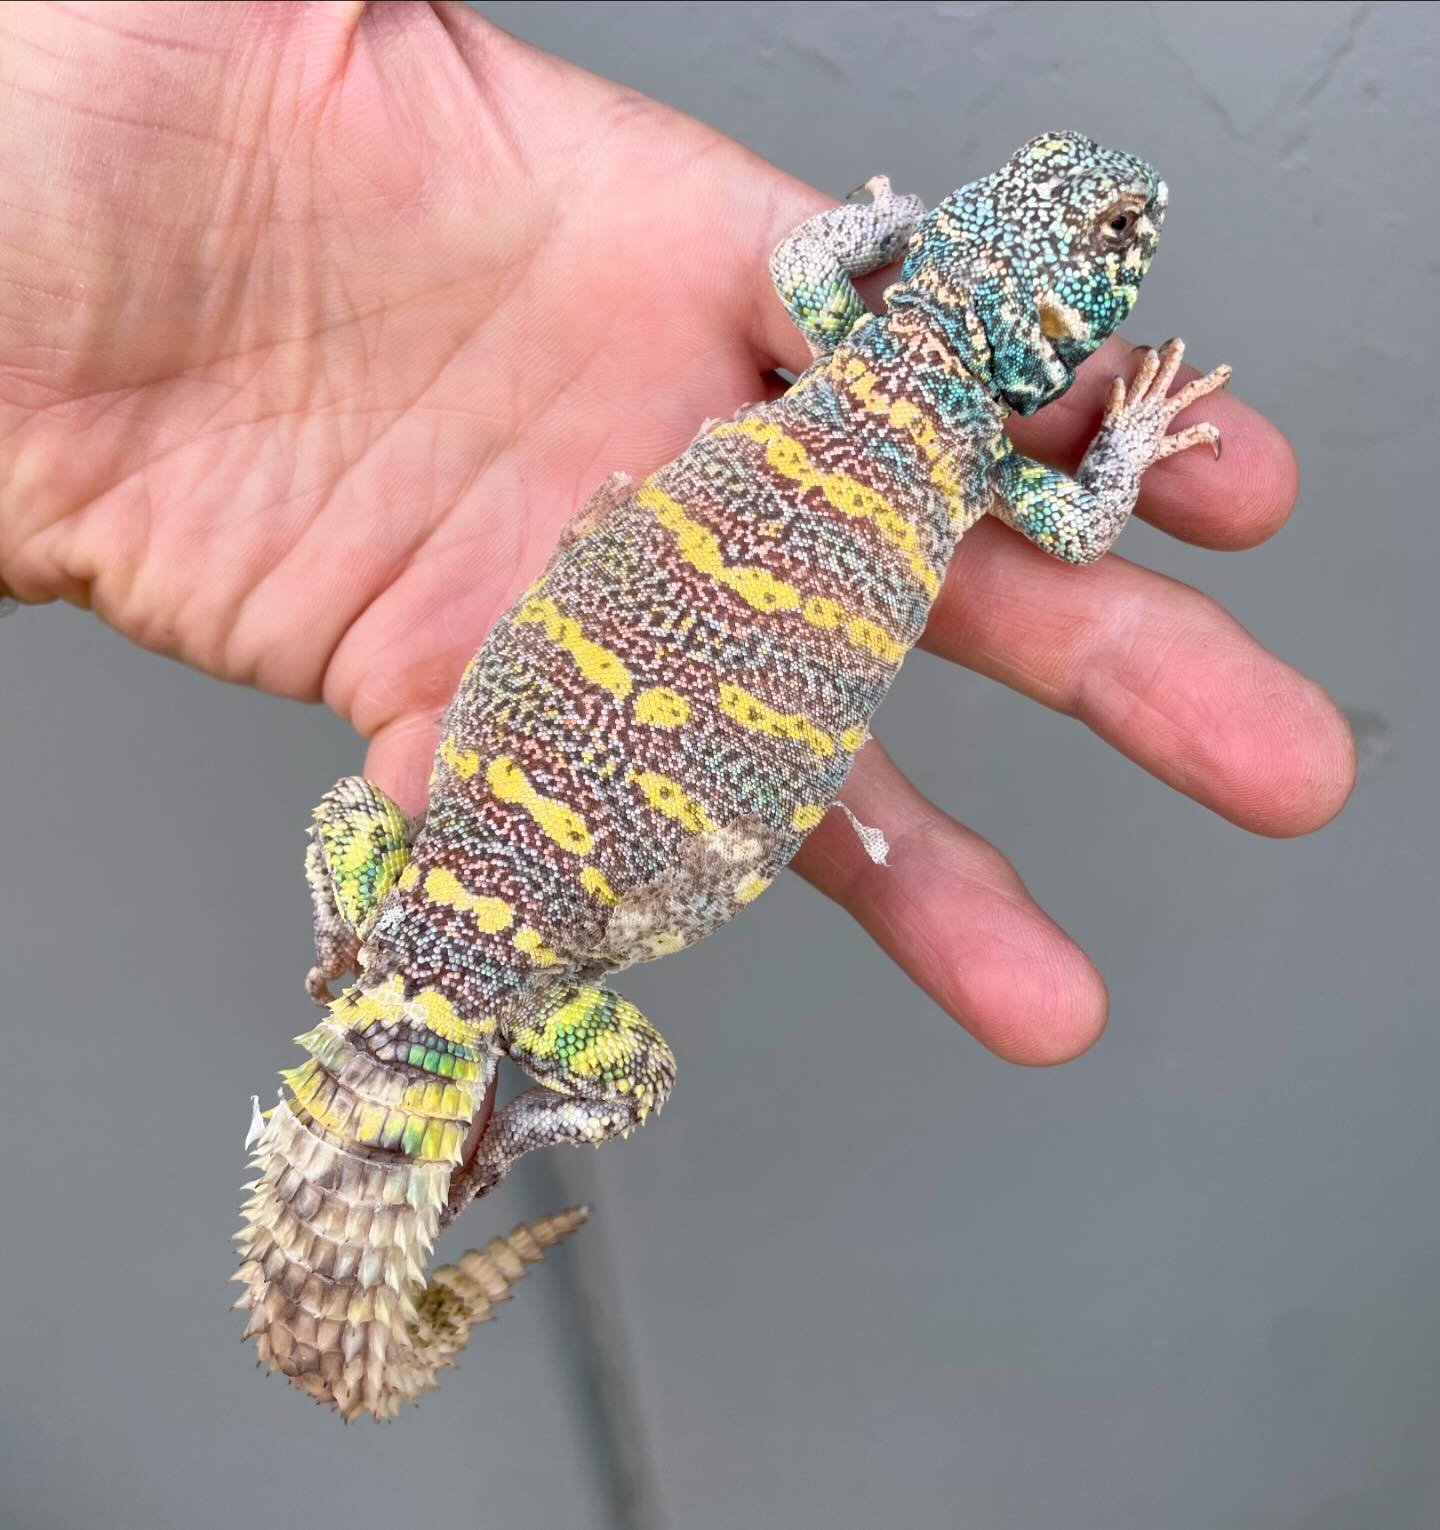 Uromastyx Ornata siblings. One of the things I love about this species is how variable they can be. Watching each one grow is like a surprise, you never know exactly what you&rsquo;re going to see until they are fully grown. #aridsonly #lizards #liza